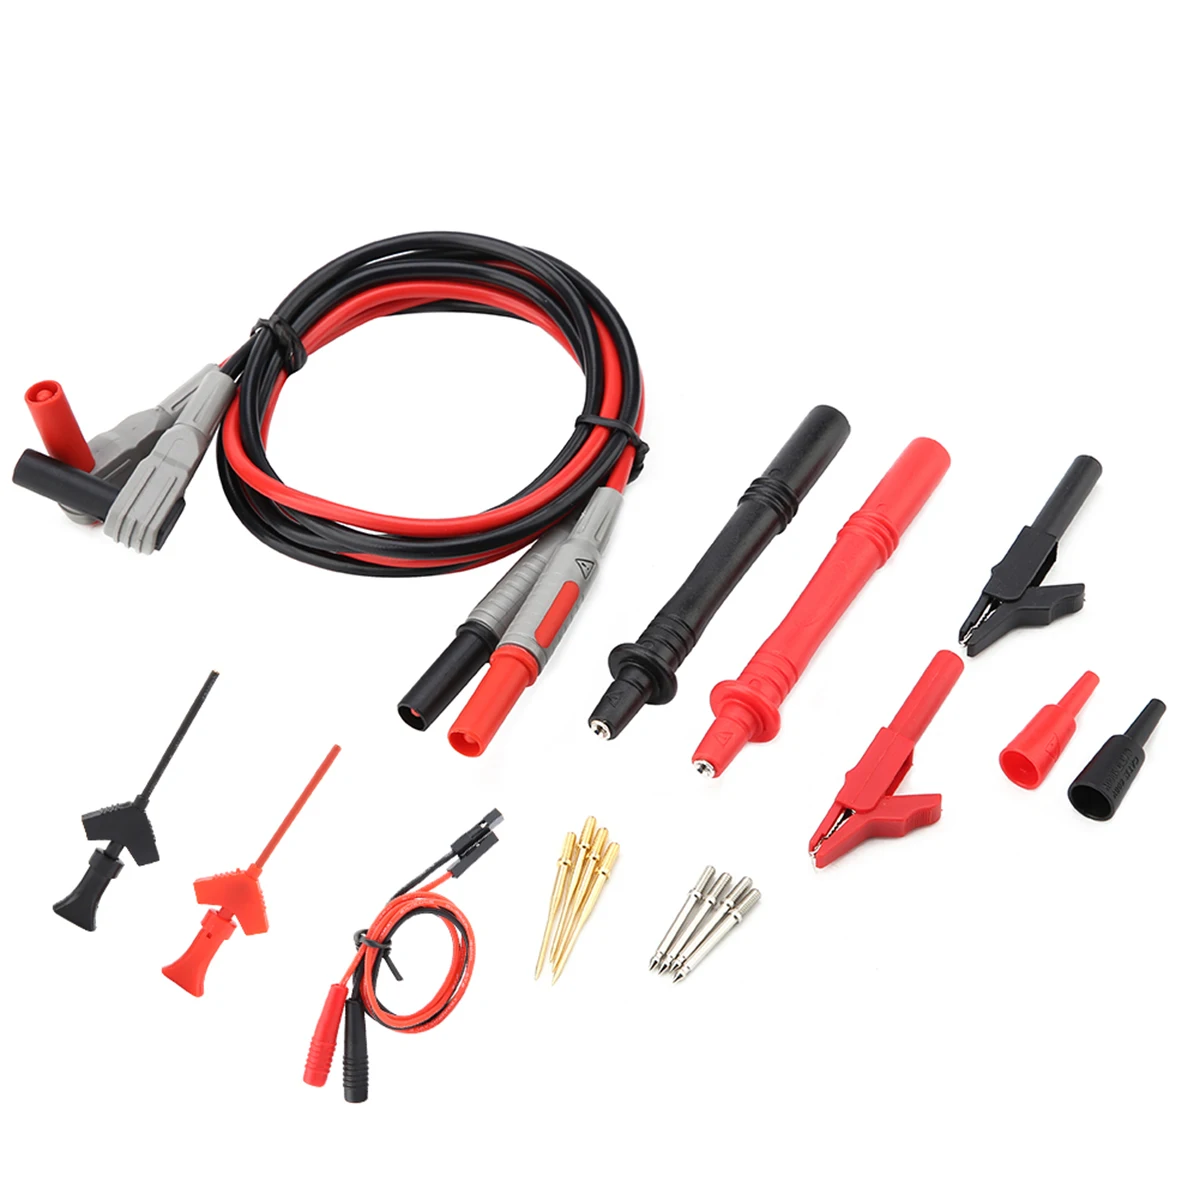 

P1300C Electronic Digital Multimeter Test Leads with Crocodile Clips Replaceable Probe Tips Set Test Test Test